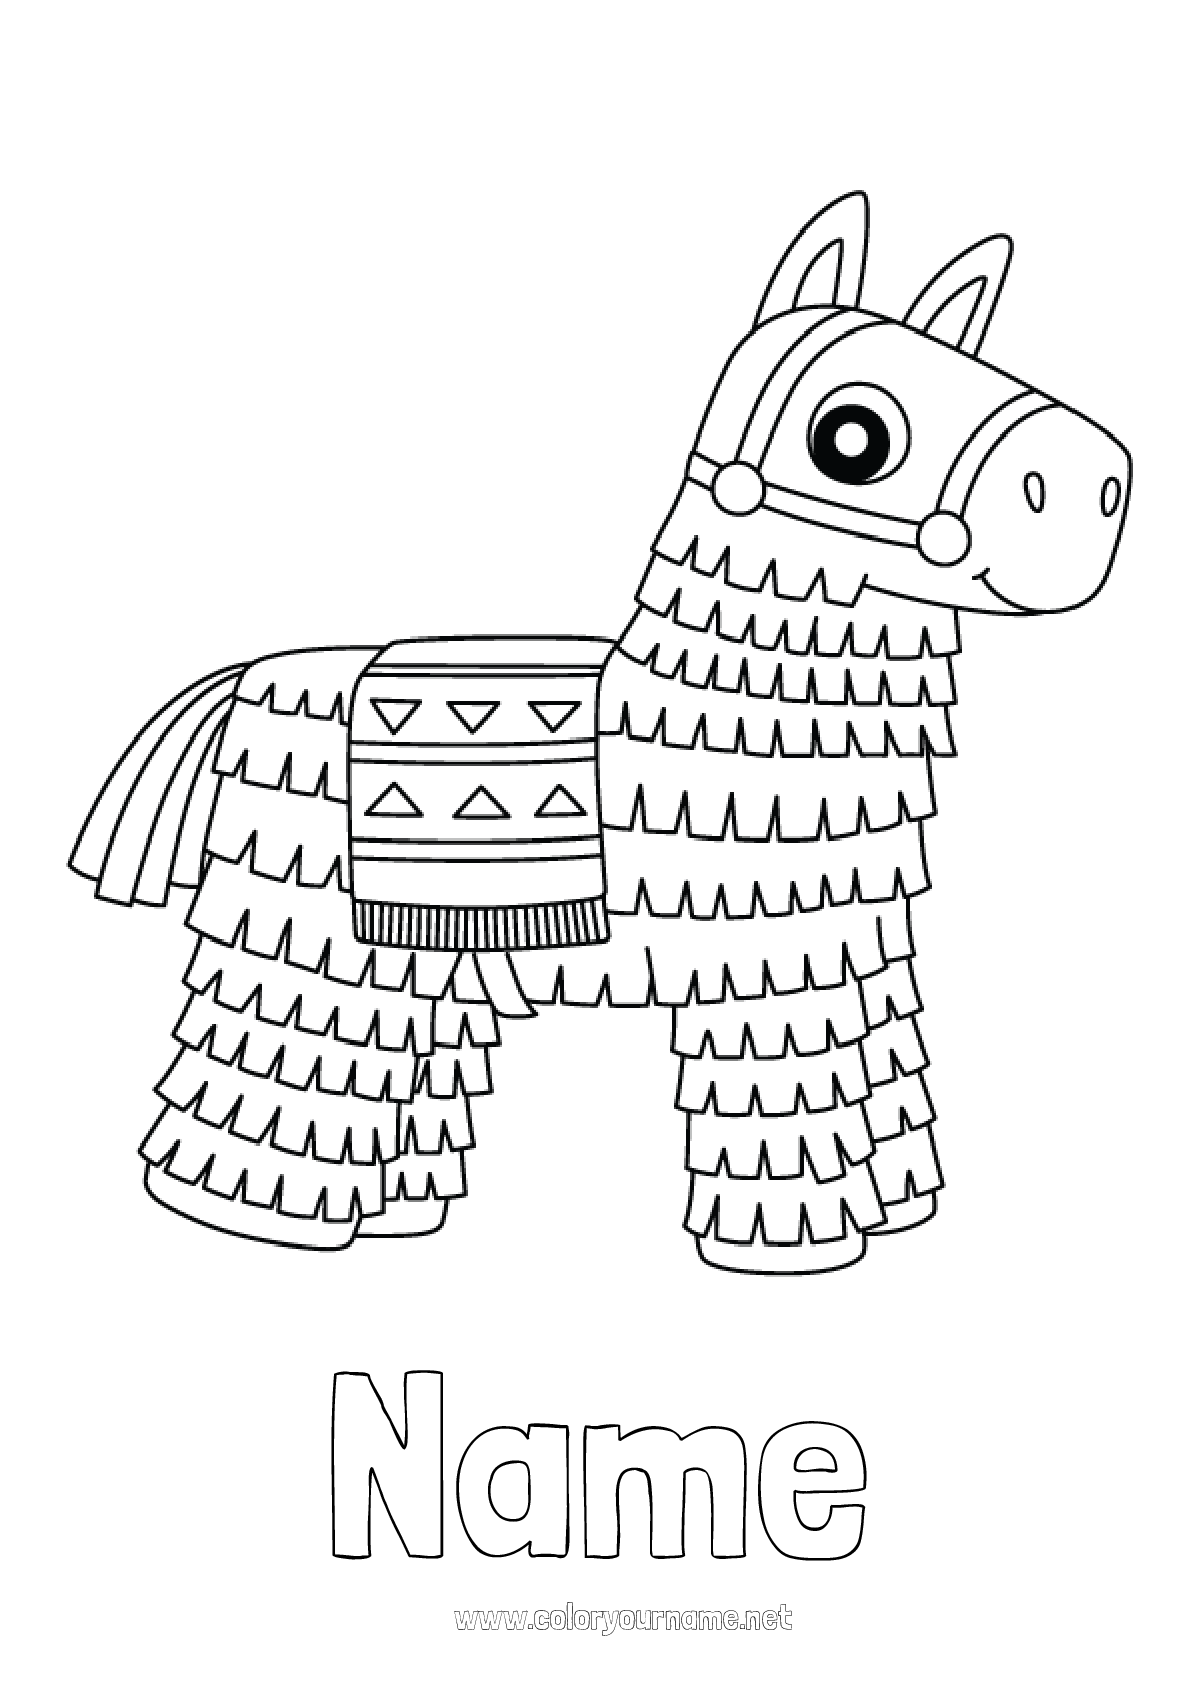 Coloring page No.1850 - Horse Mexico Easy coloring pages